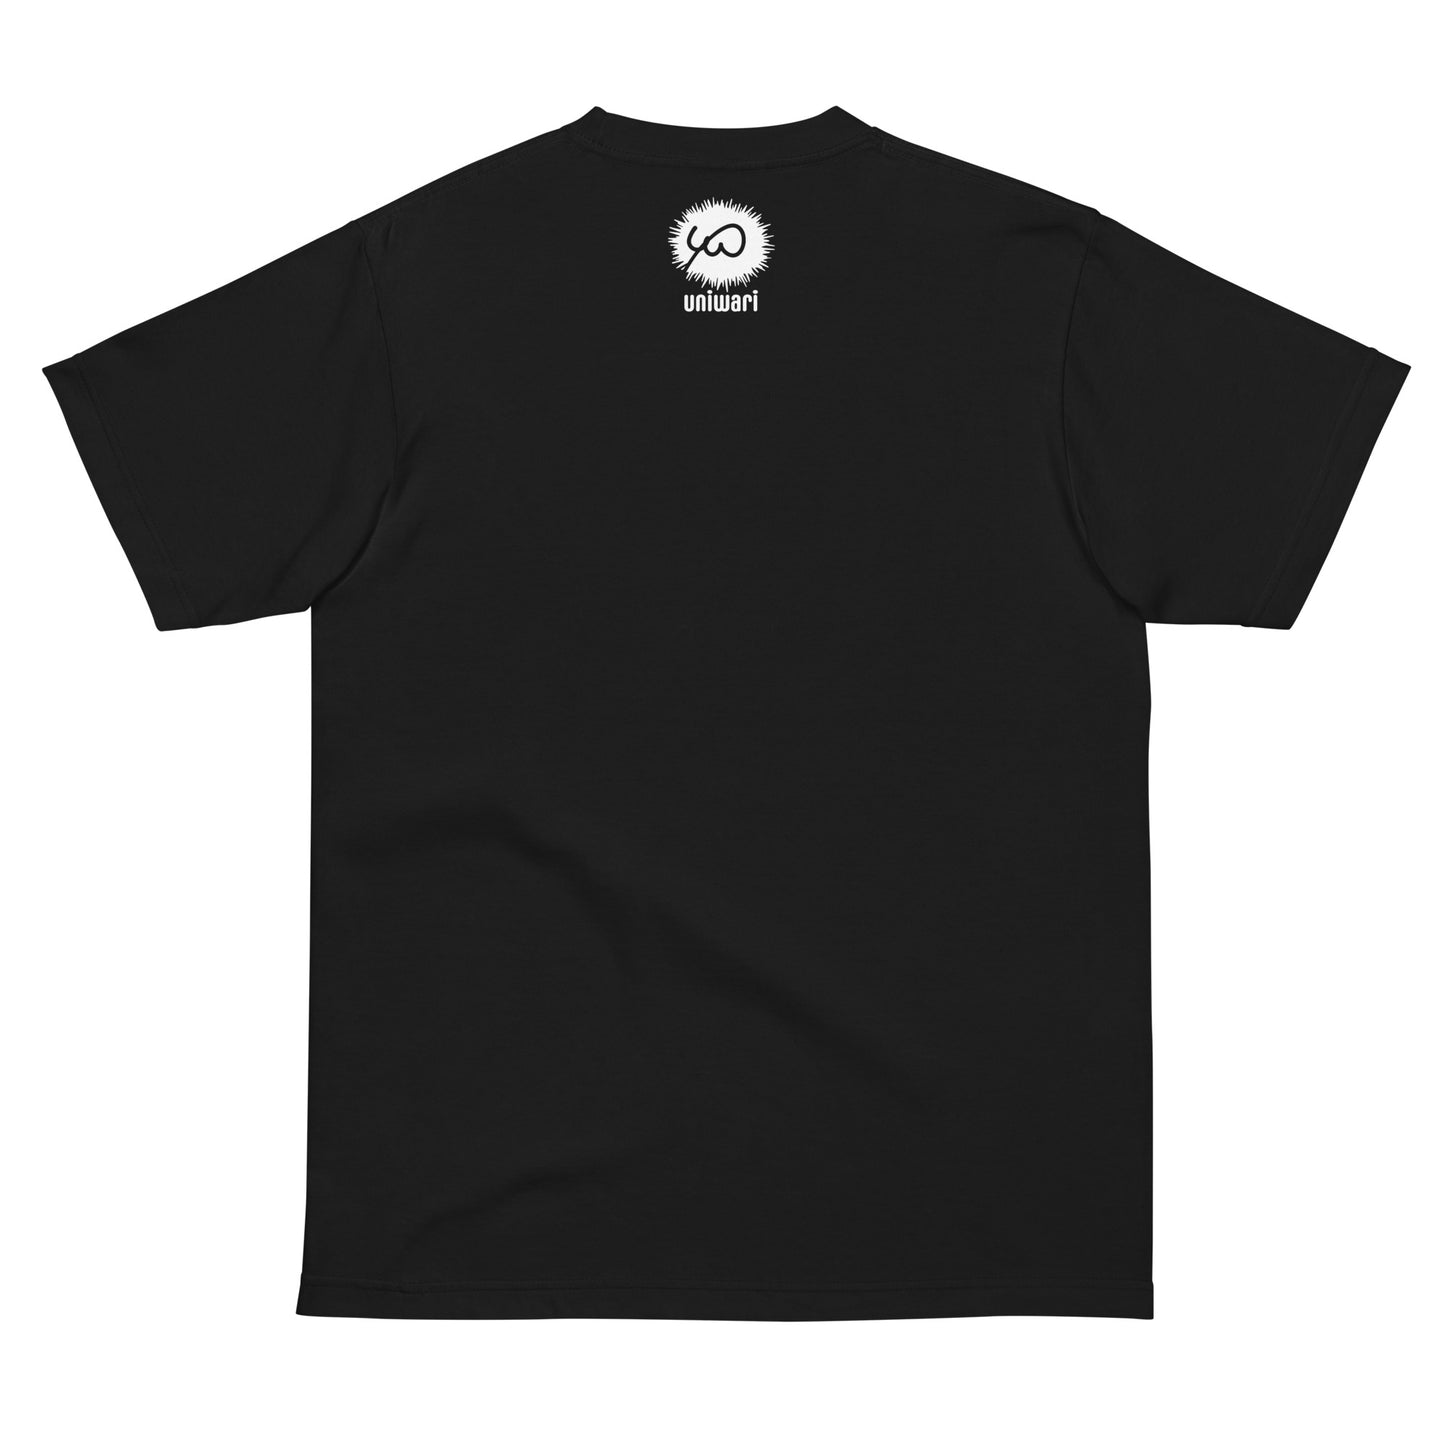 Black High Quality Tee - Front Design with an White Uniwari Logo - Back Design with Weekdays in Japanese and Green back ground